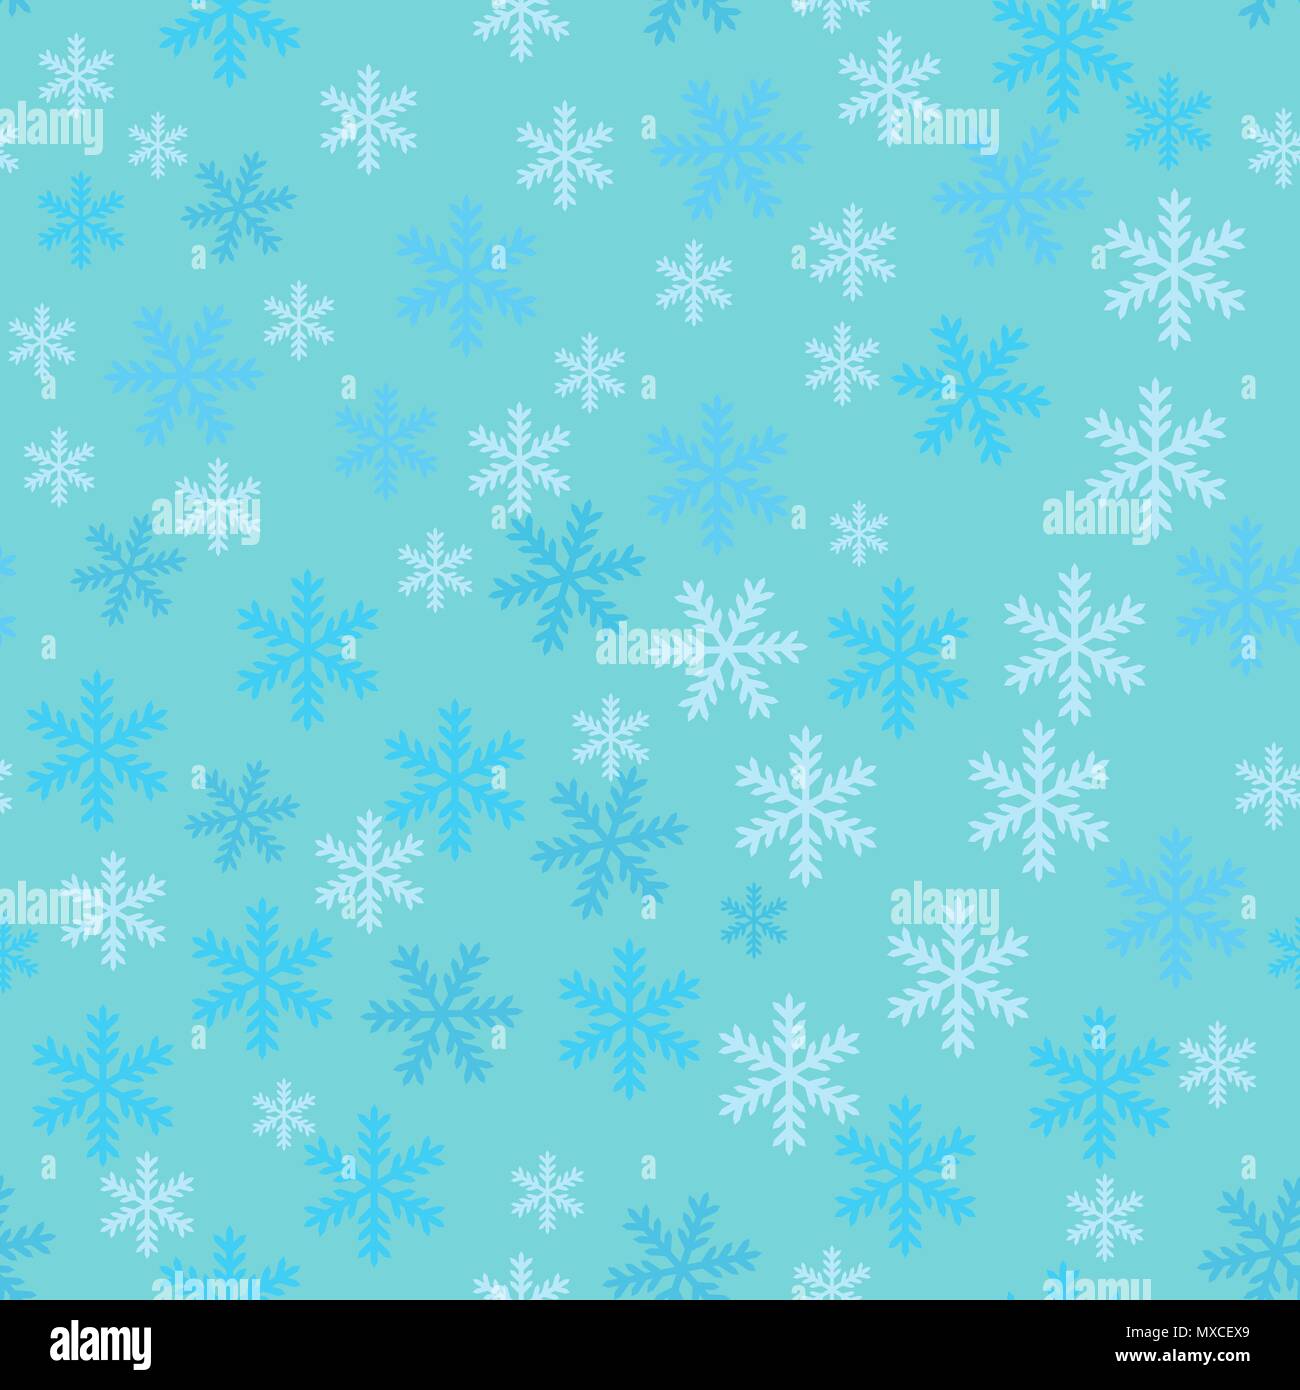 Snowflake Pattern - Snowflake vector pattern blue background.EPS 10 Stock Vector